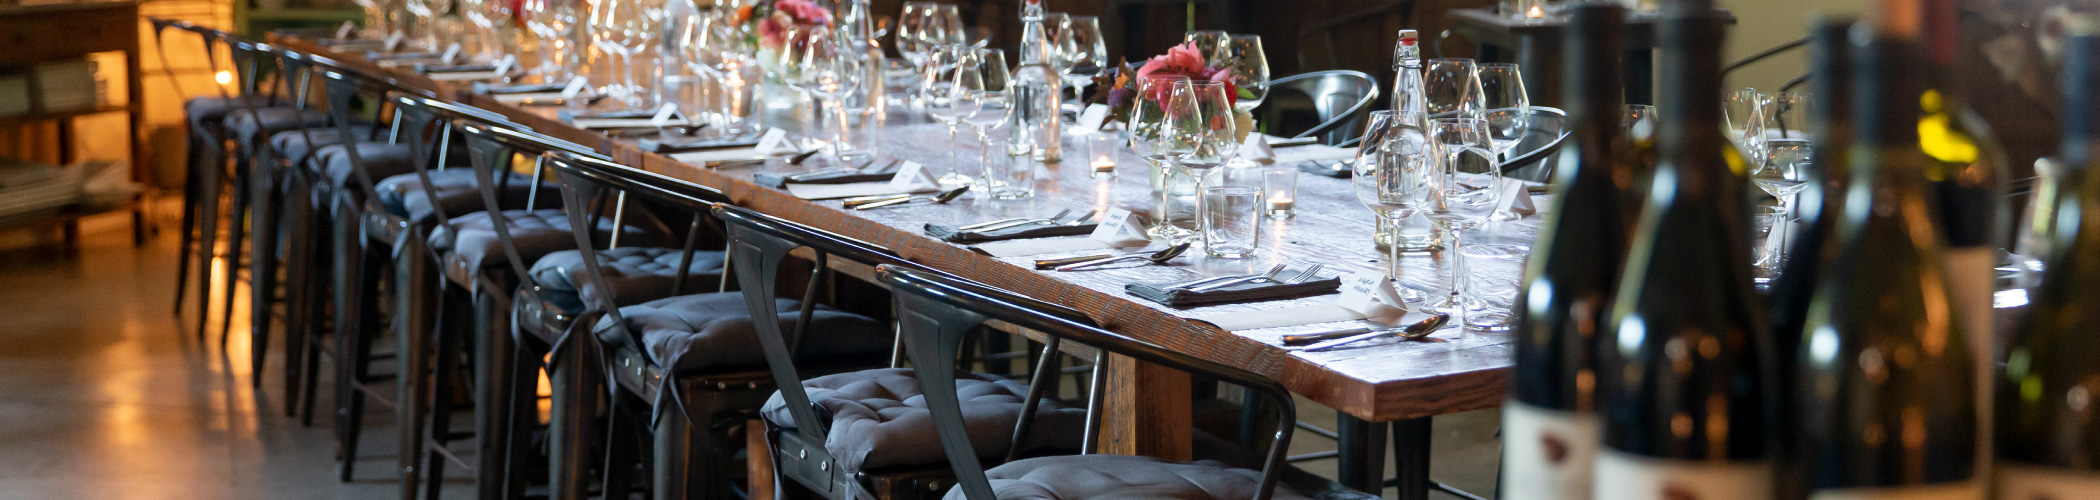 A barnwood table at The Kitchen at Middlground Farms set for a private event.